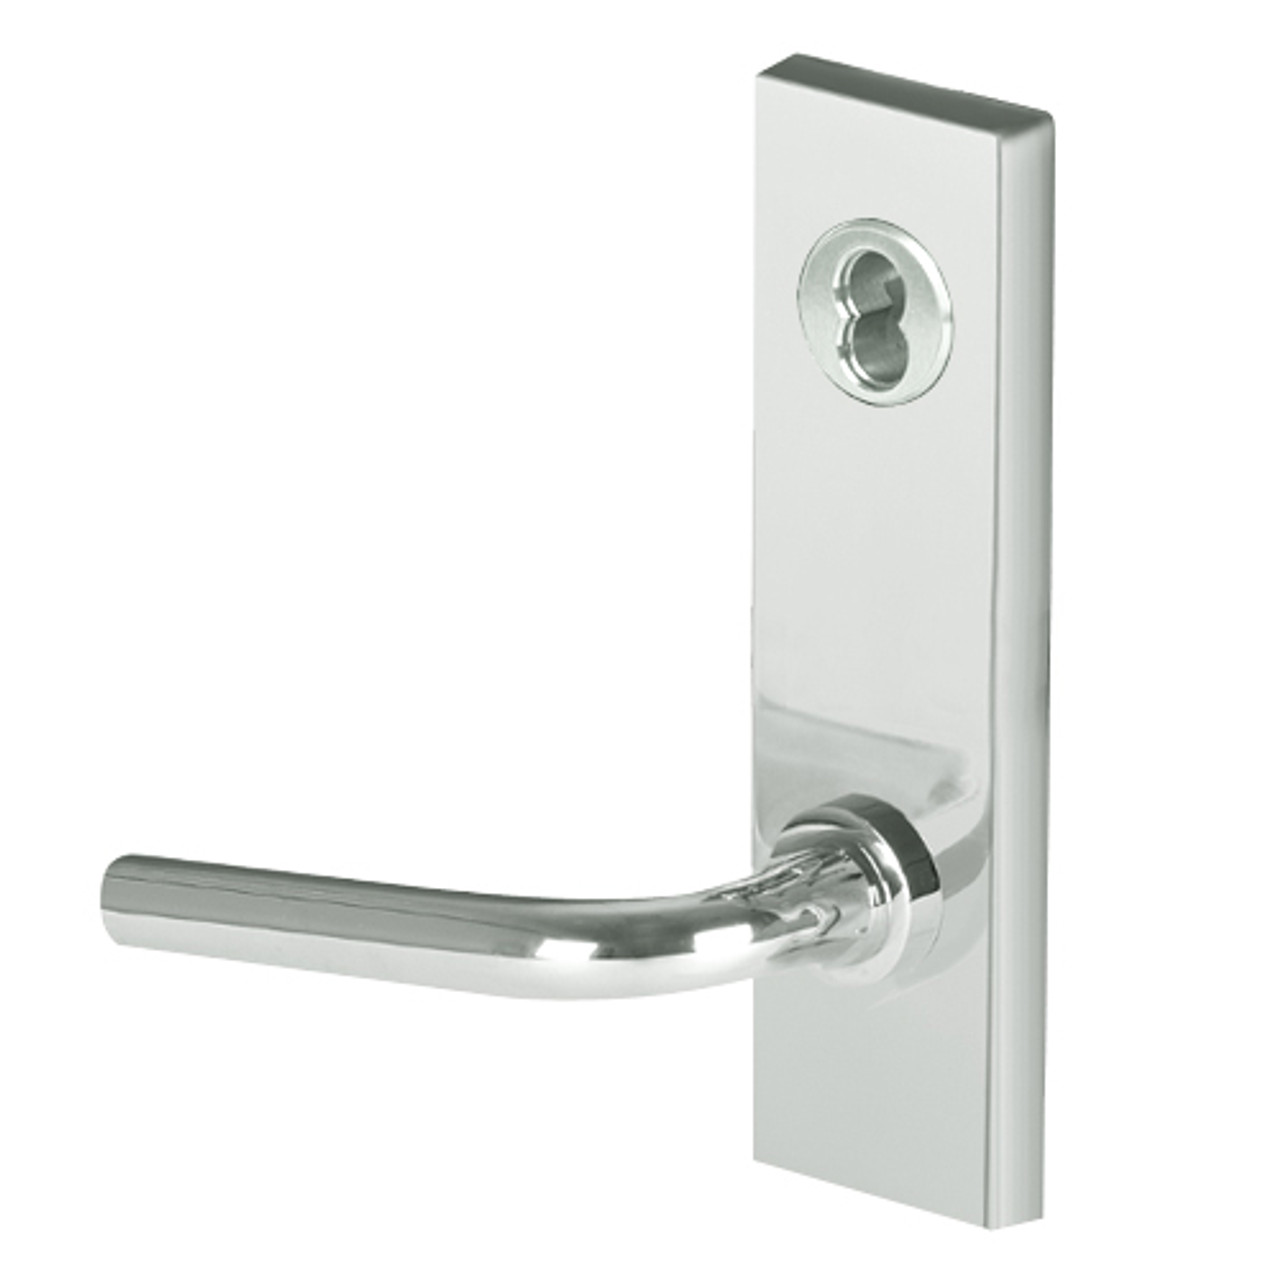 45H7G12M618 Best 40H Series Communicating with Deadbolt Heavy Duty Mortise Lever Lock with Solid Tube with No Return in Bright Nickel